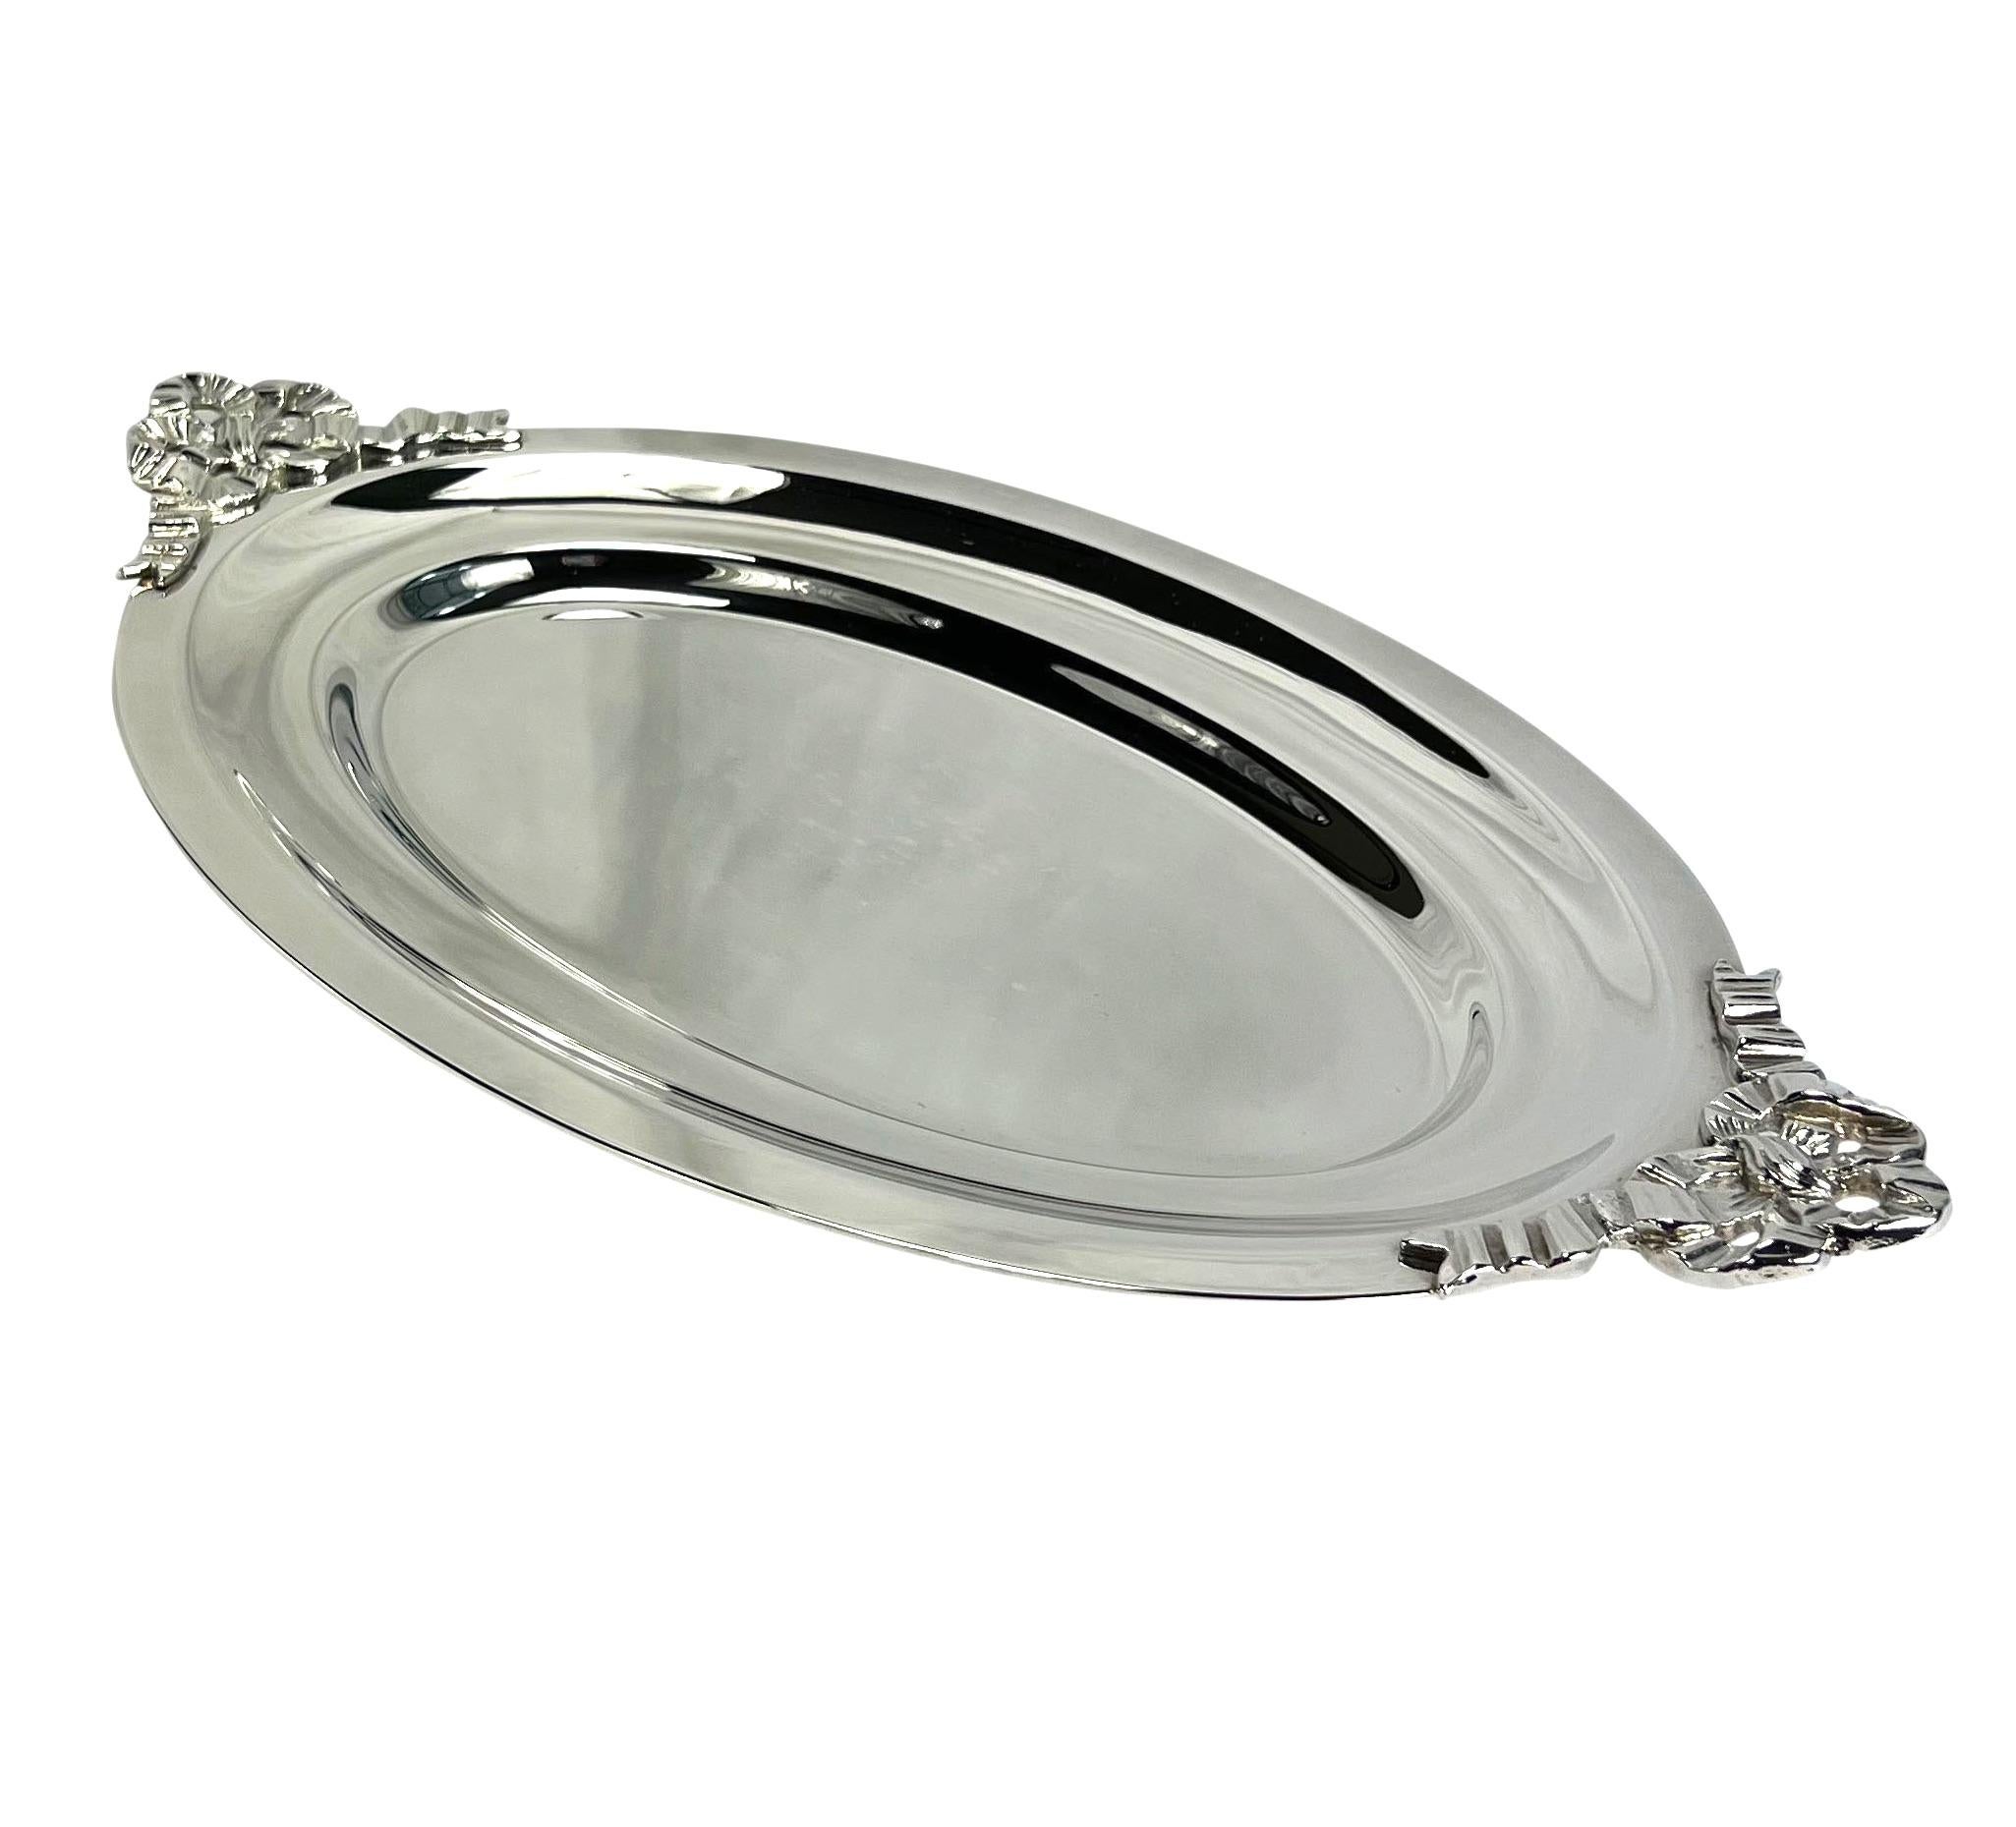 Presenting a beautiful Christian Dior oval silver plate serving plate. This vintage plate is perfect for serving or decorating and is complete with ribbon handles and its original box!

Dimensions: 
Width: 13.75